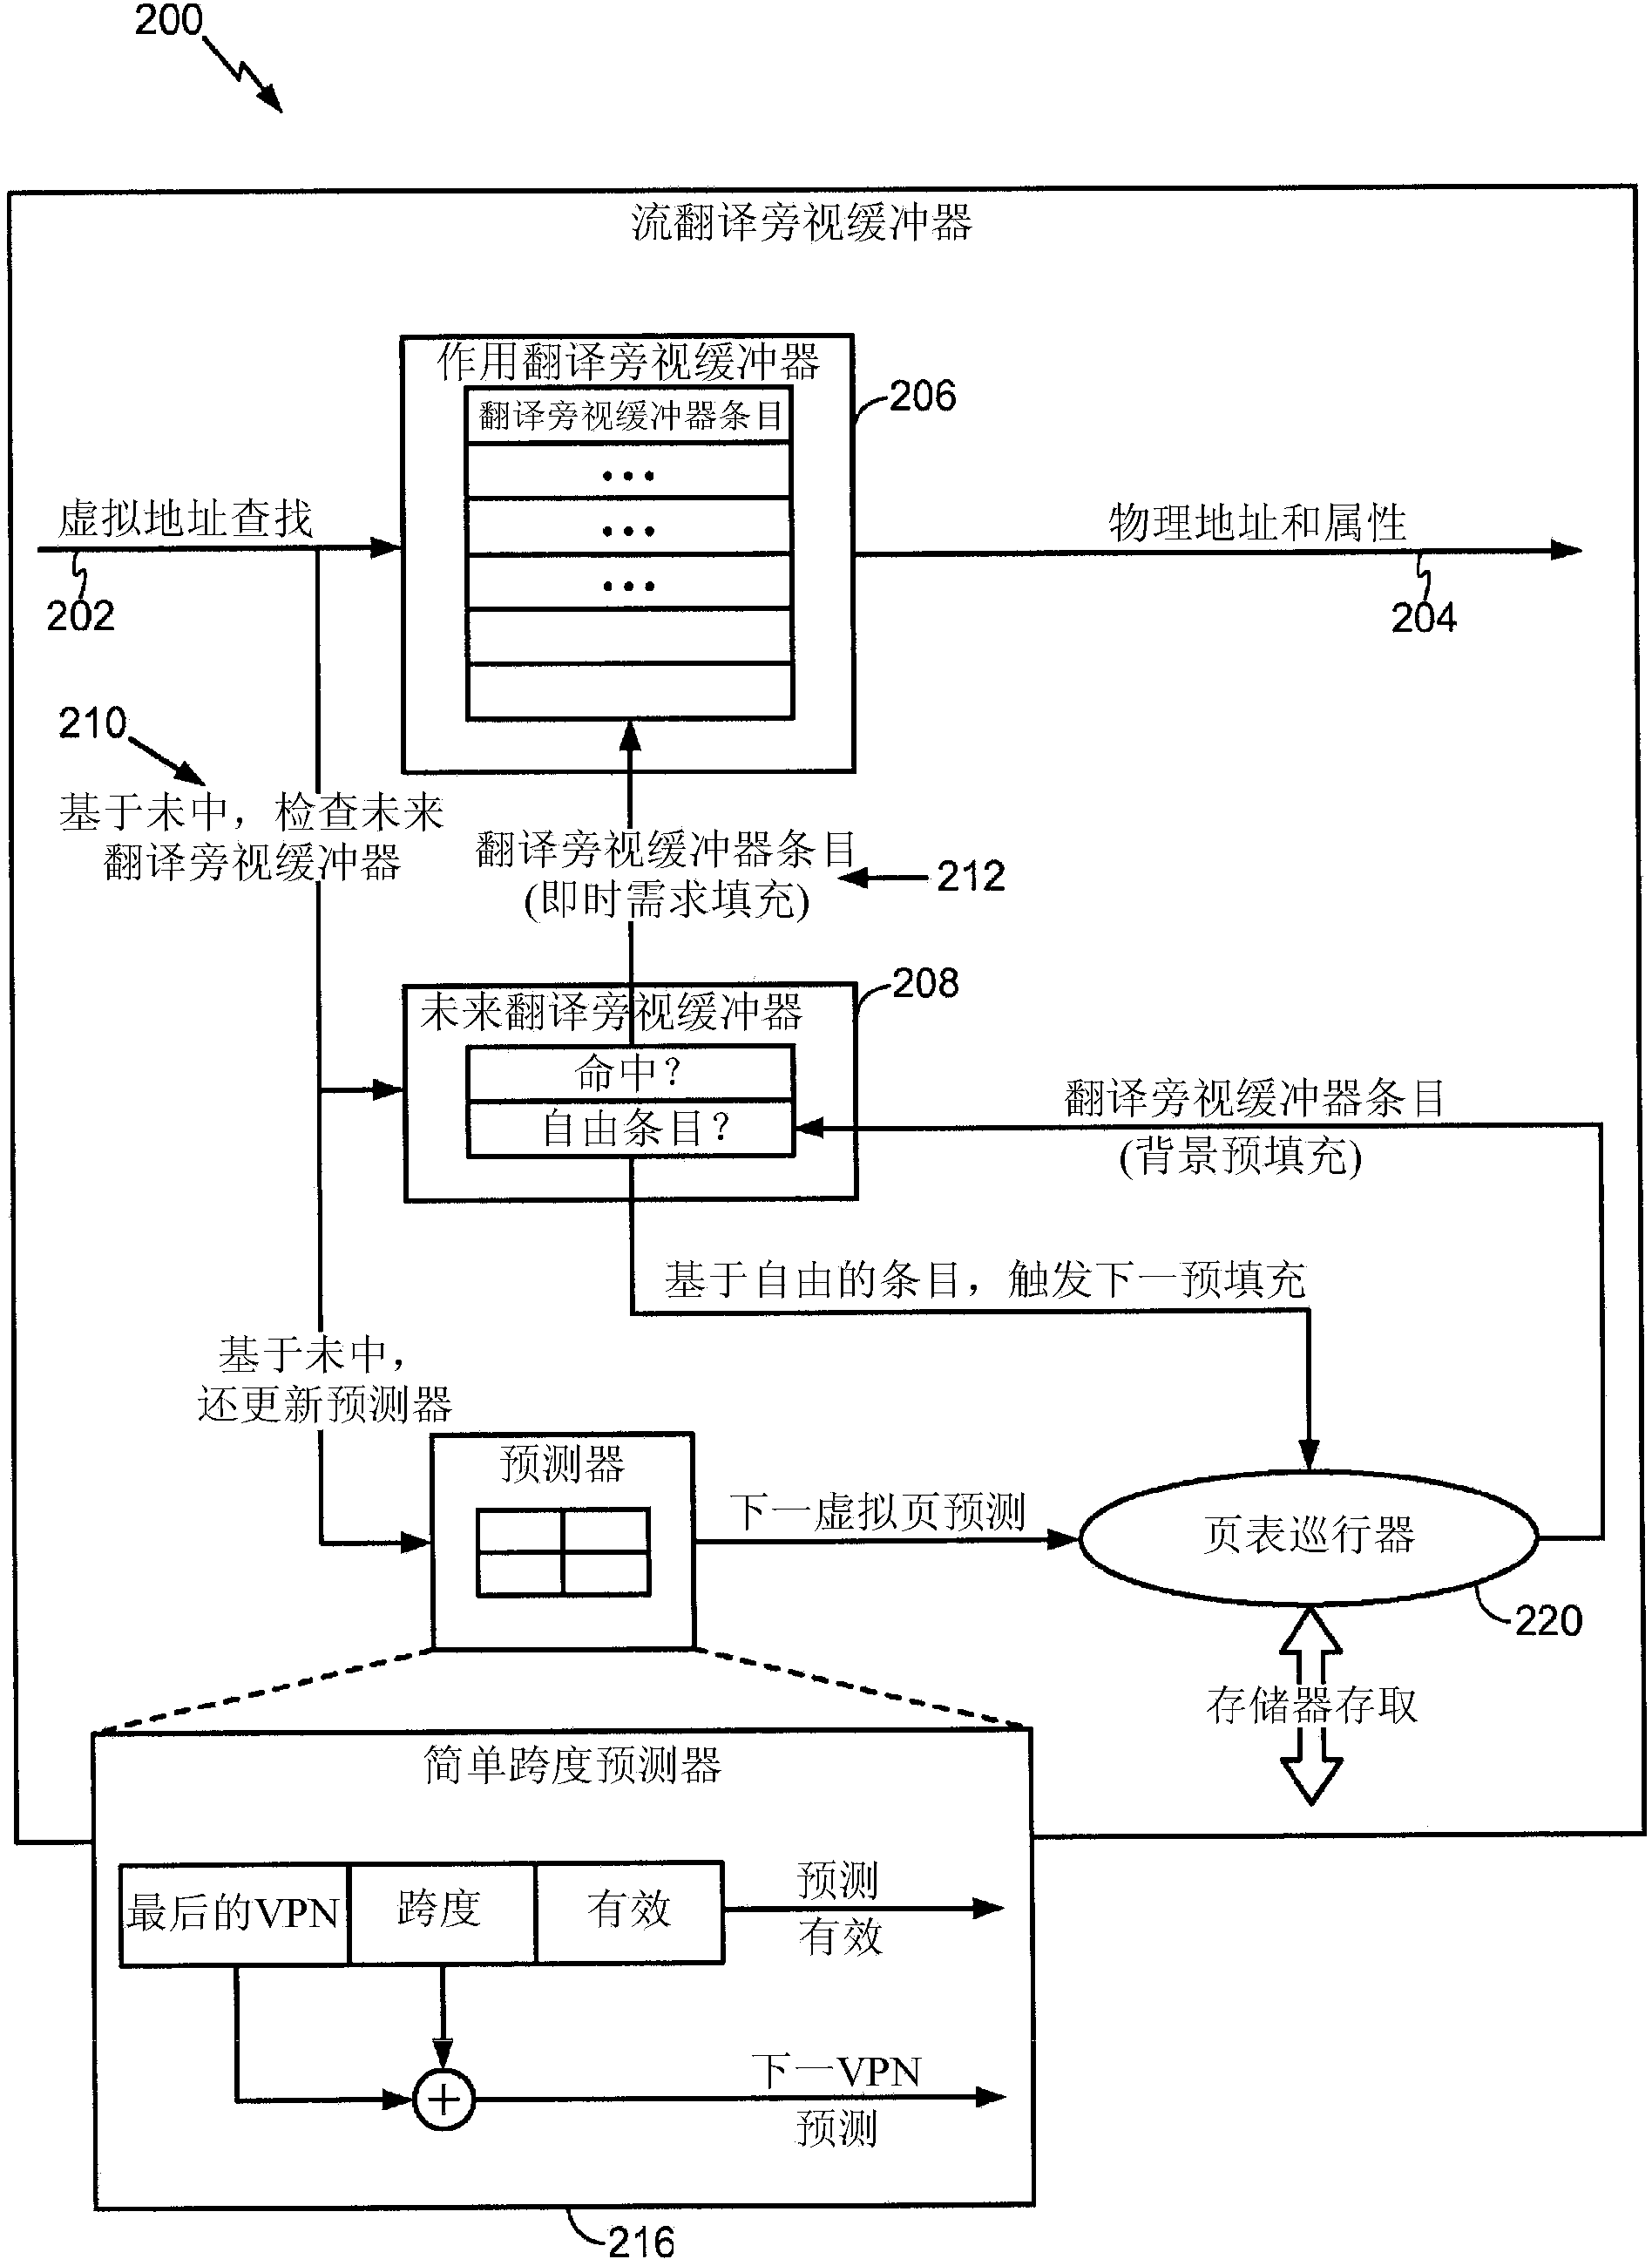 Memory management unit with pre-filling capability